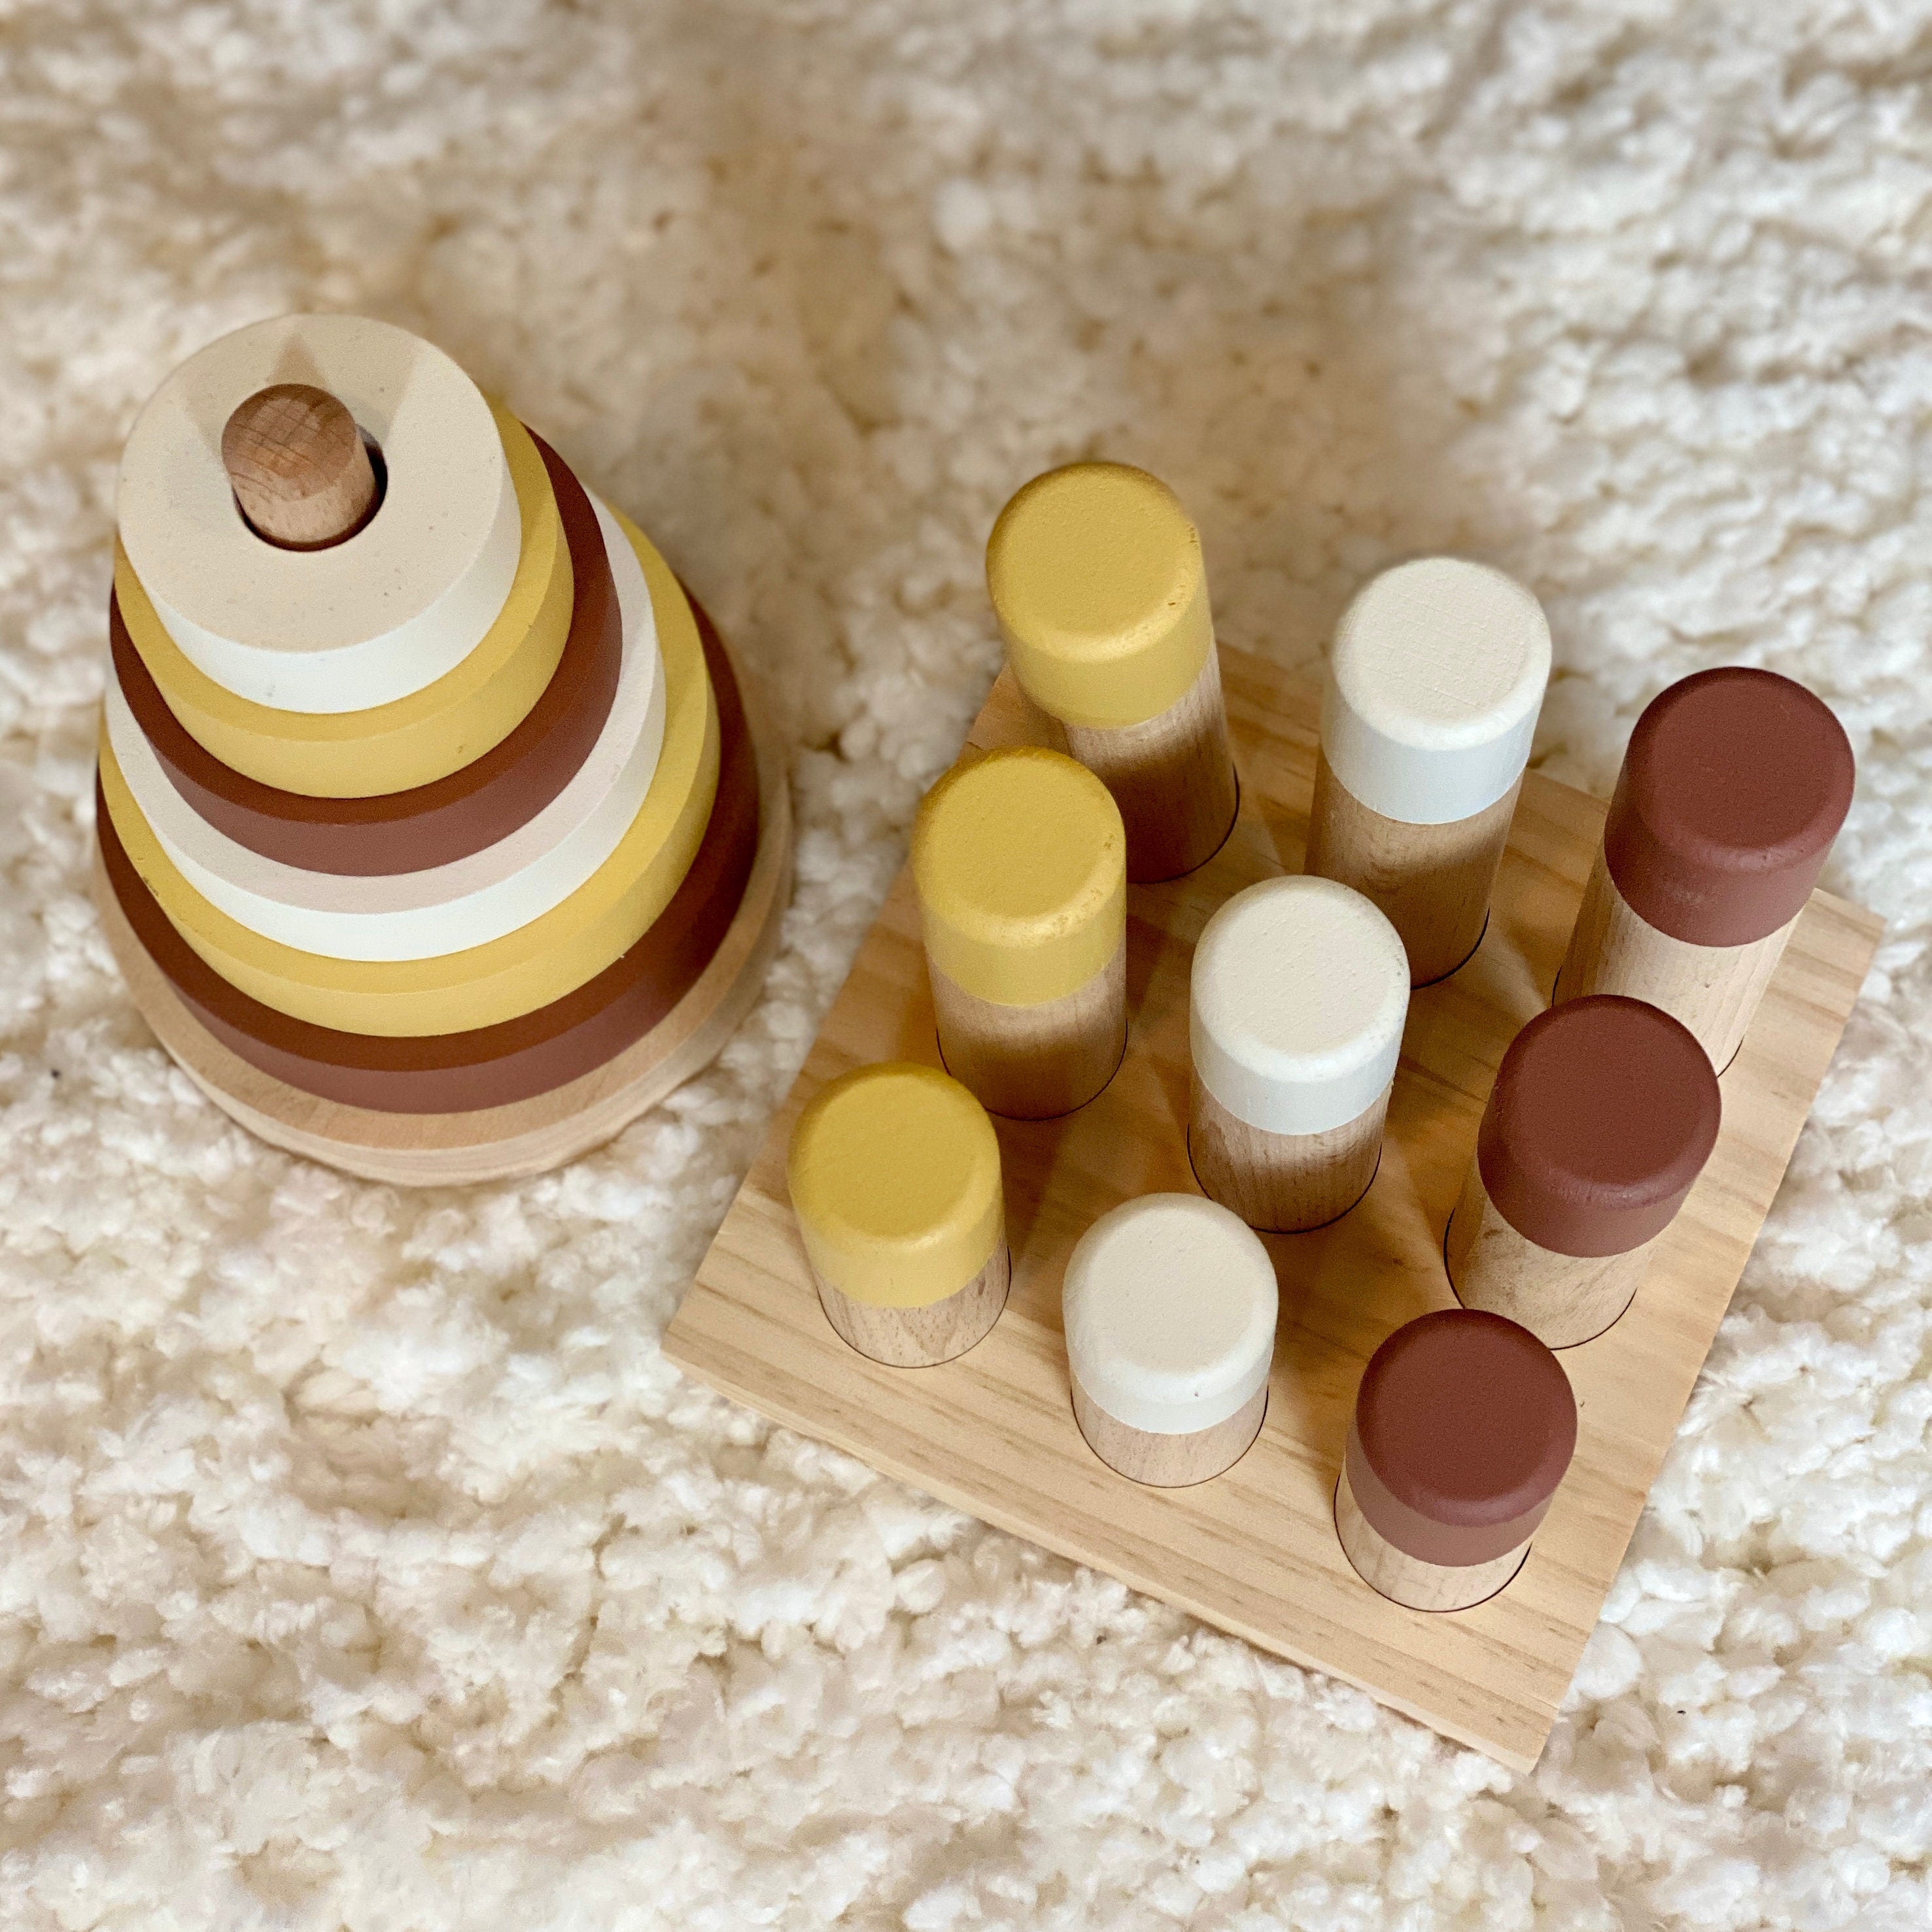 Forest Wooden Stacking Pyramid & Peg Board Sorter